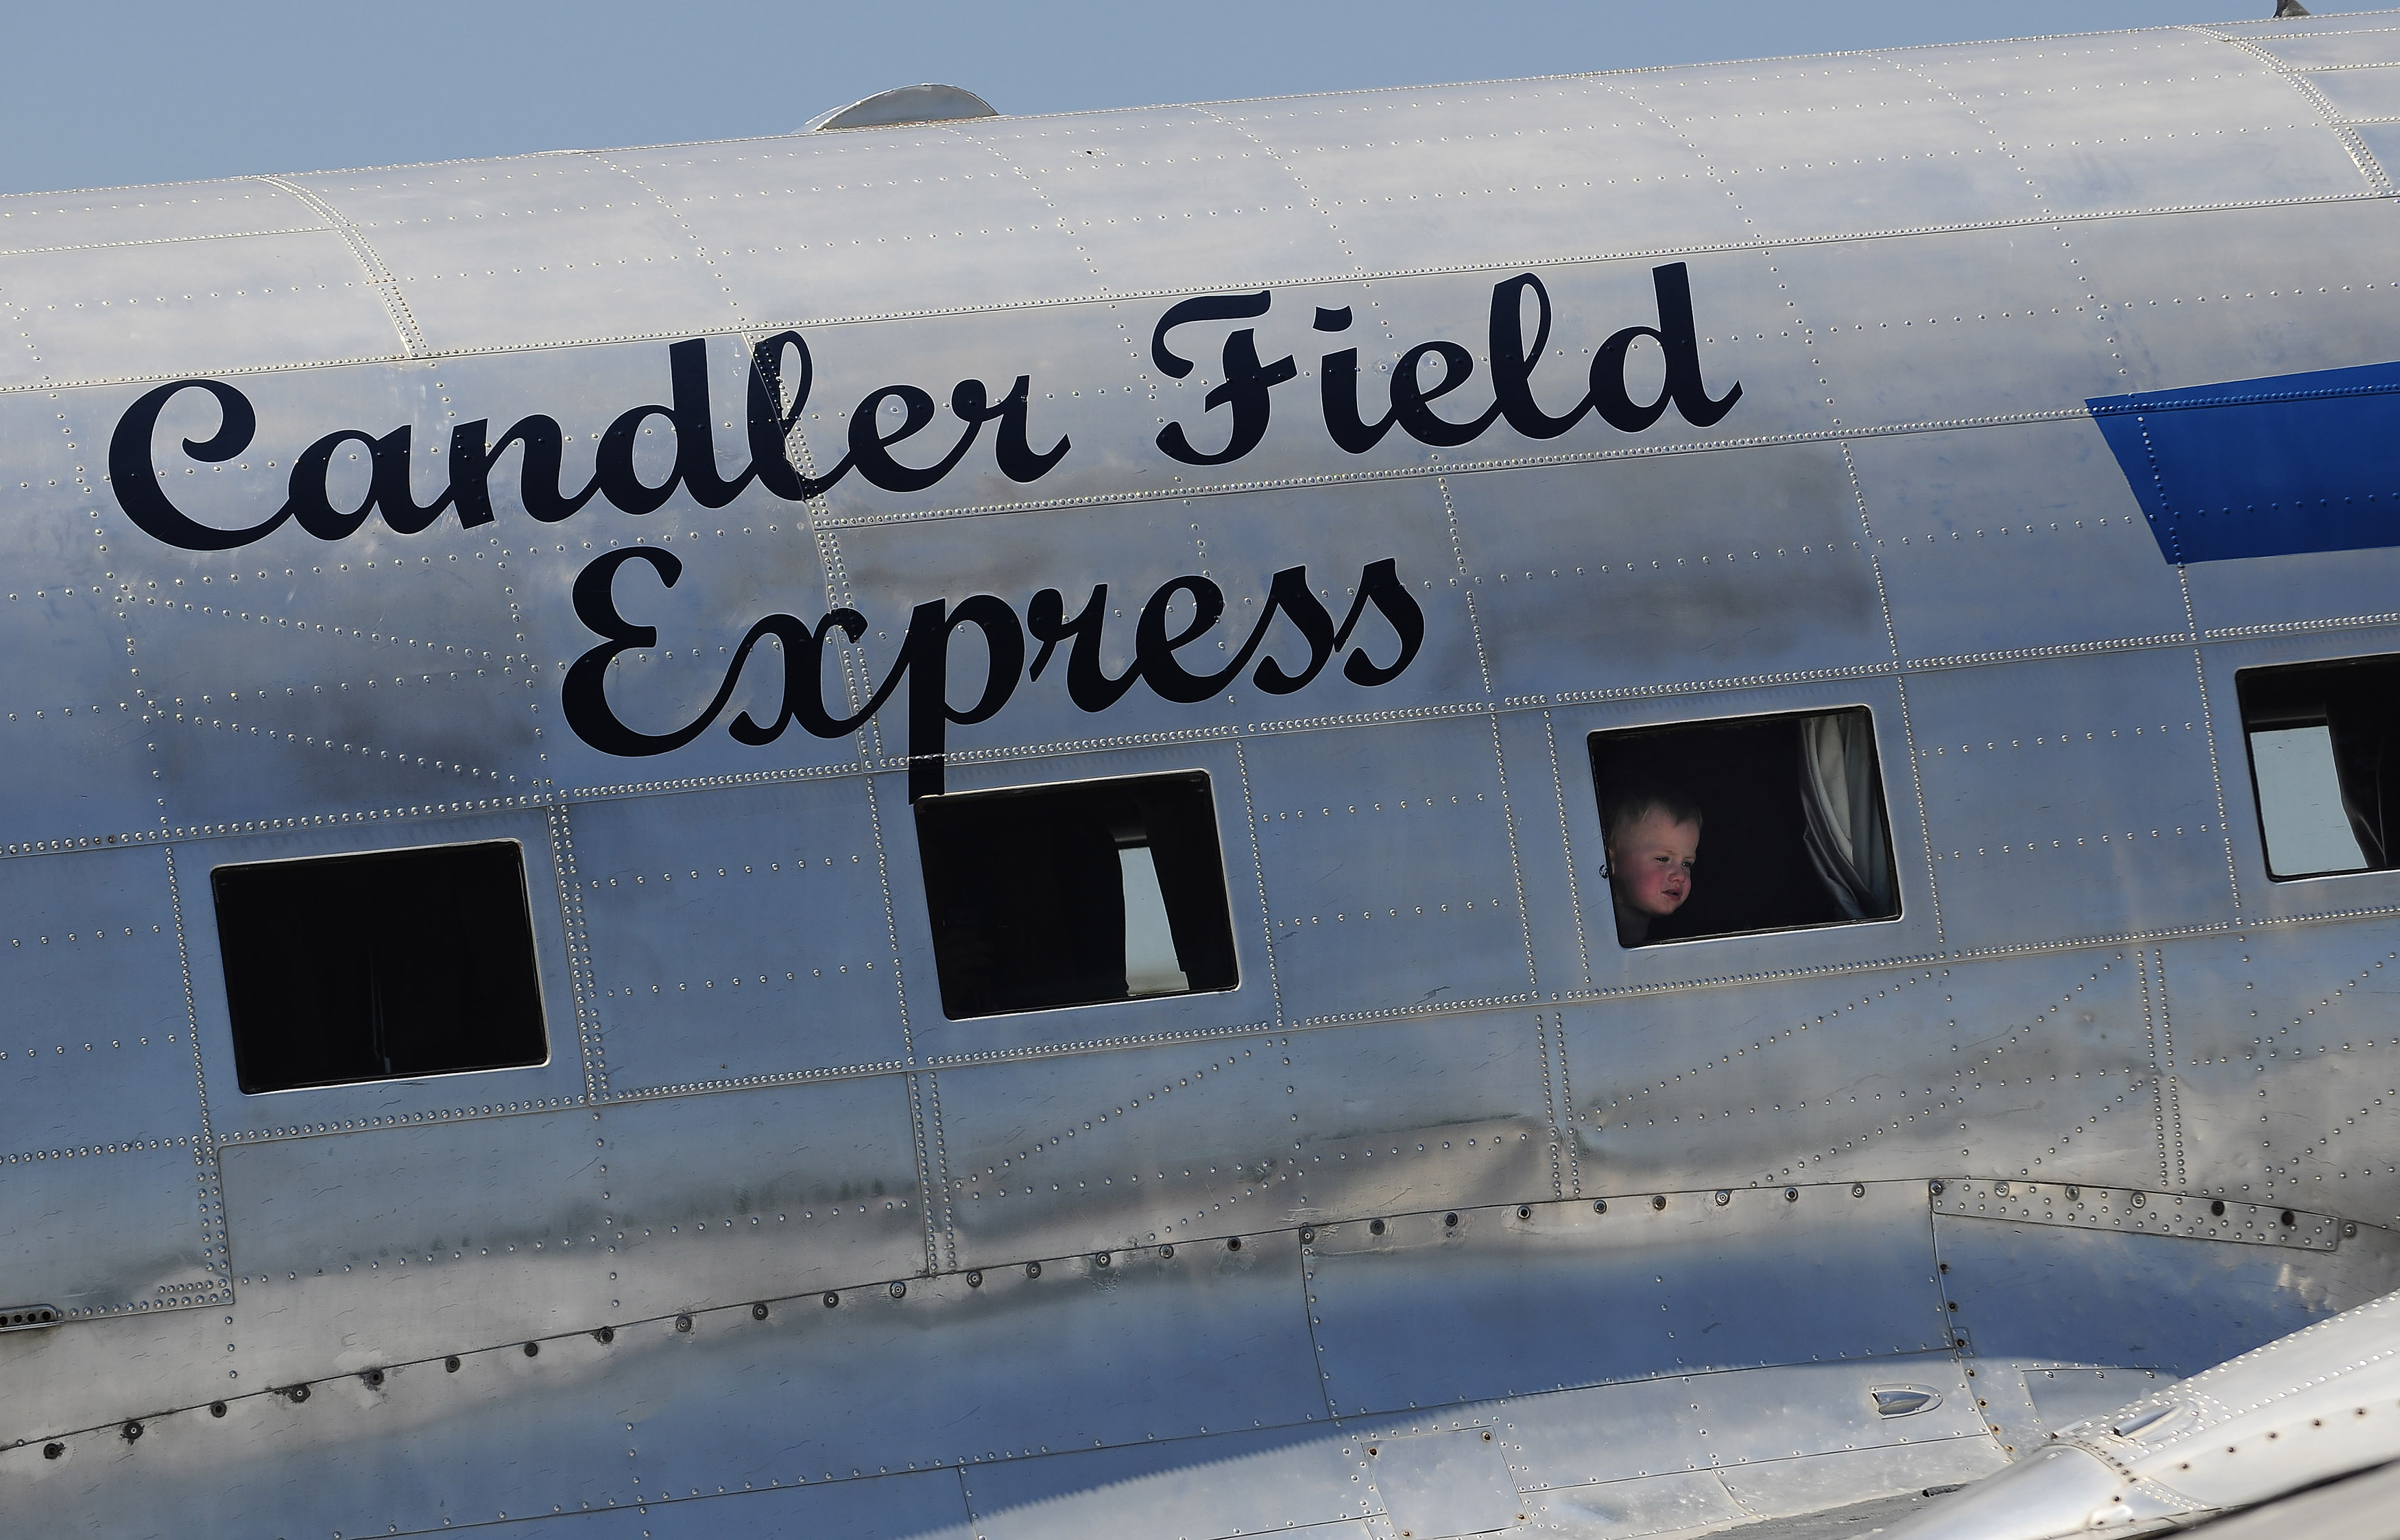 The 'Candler Field Express' DC-3 owned by Ron Alexander provides an interesting view for a young aviator during Peach State Aerodrome's 2011 Vintage Day celebration in Williamson, Georgia. Photo by David Tulis.